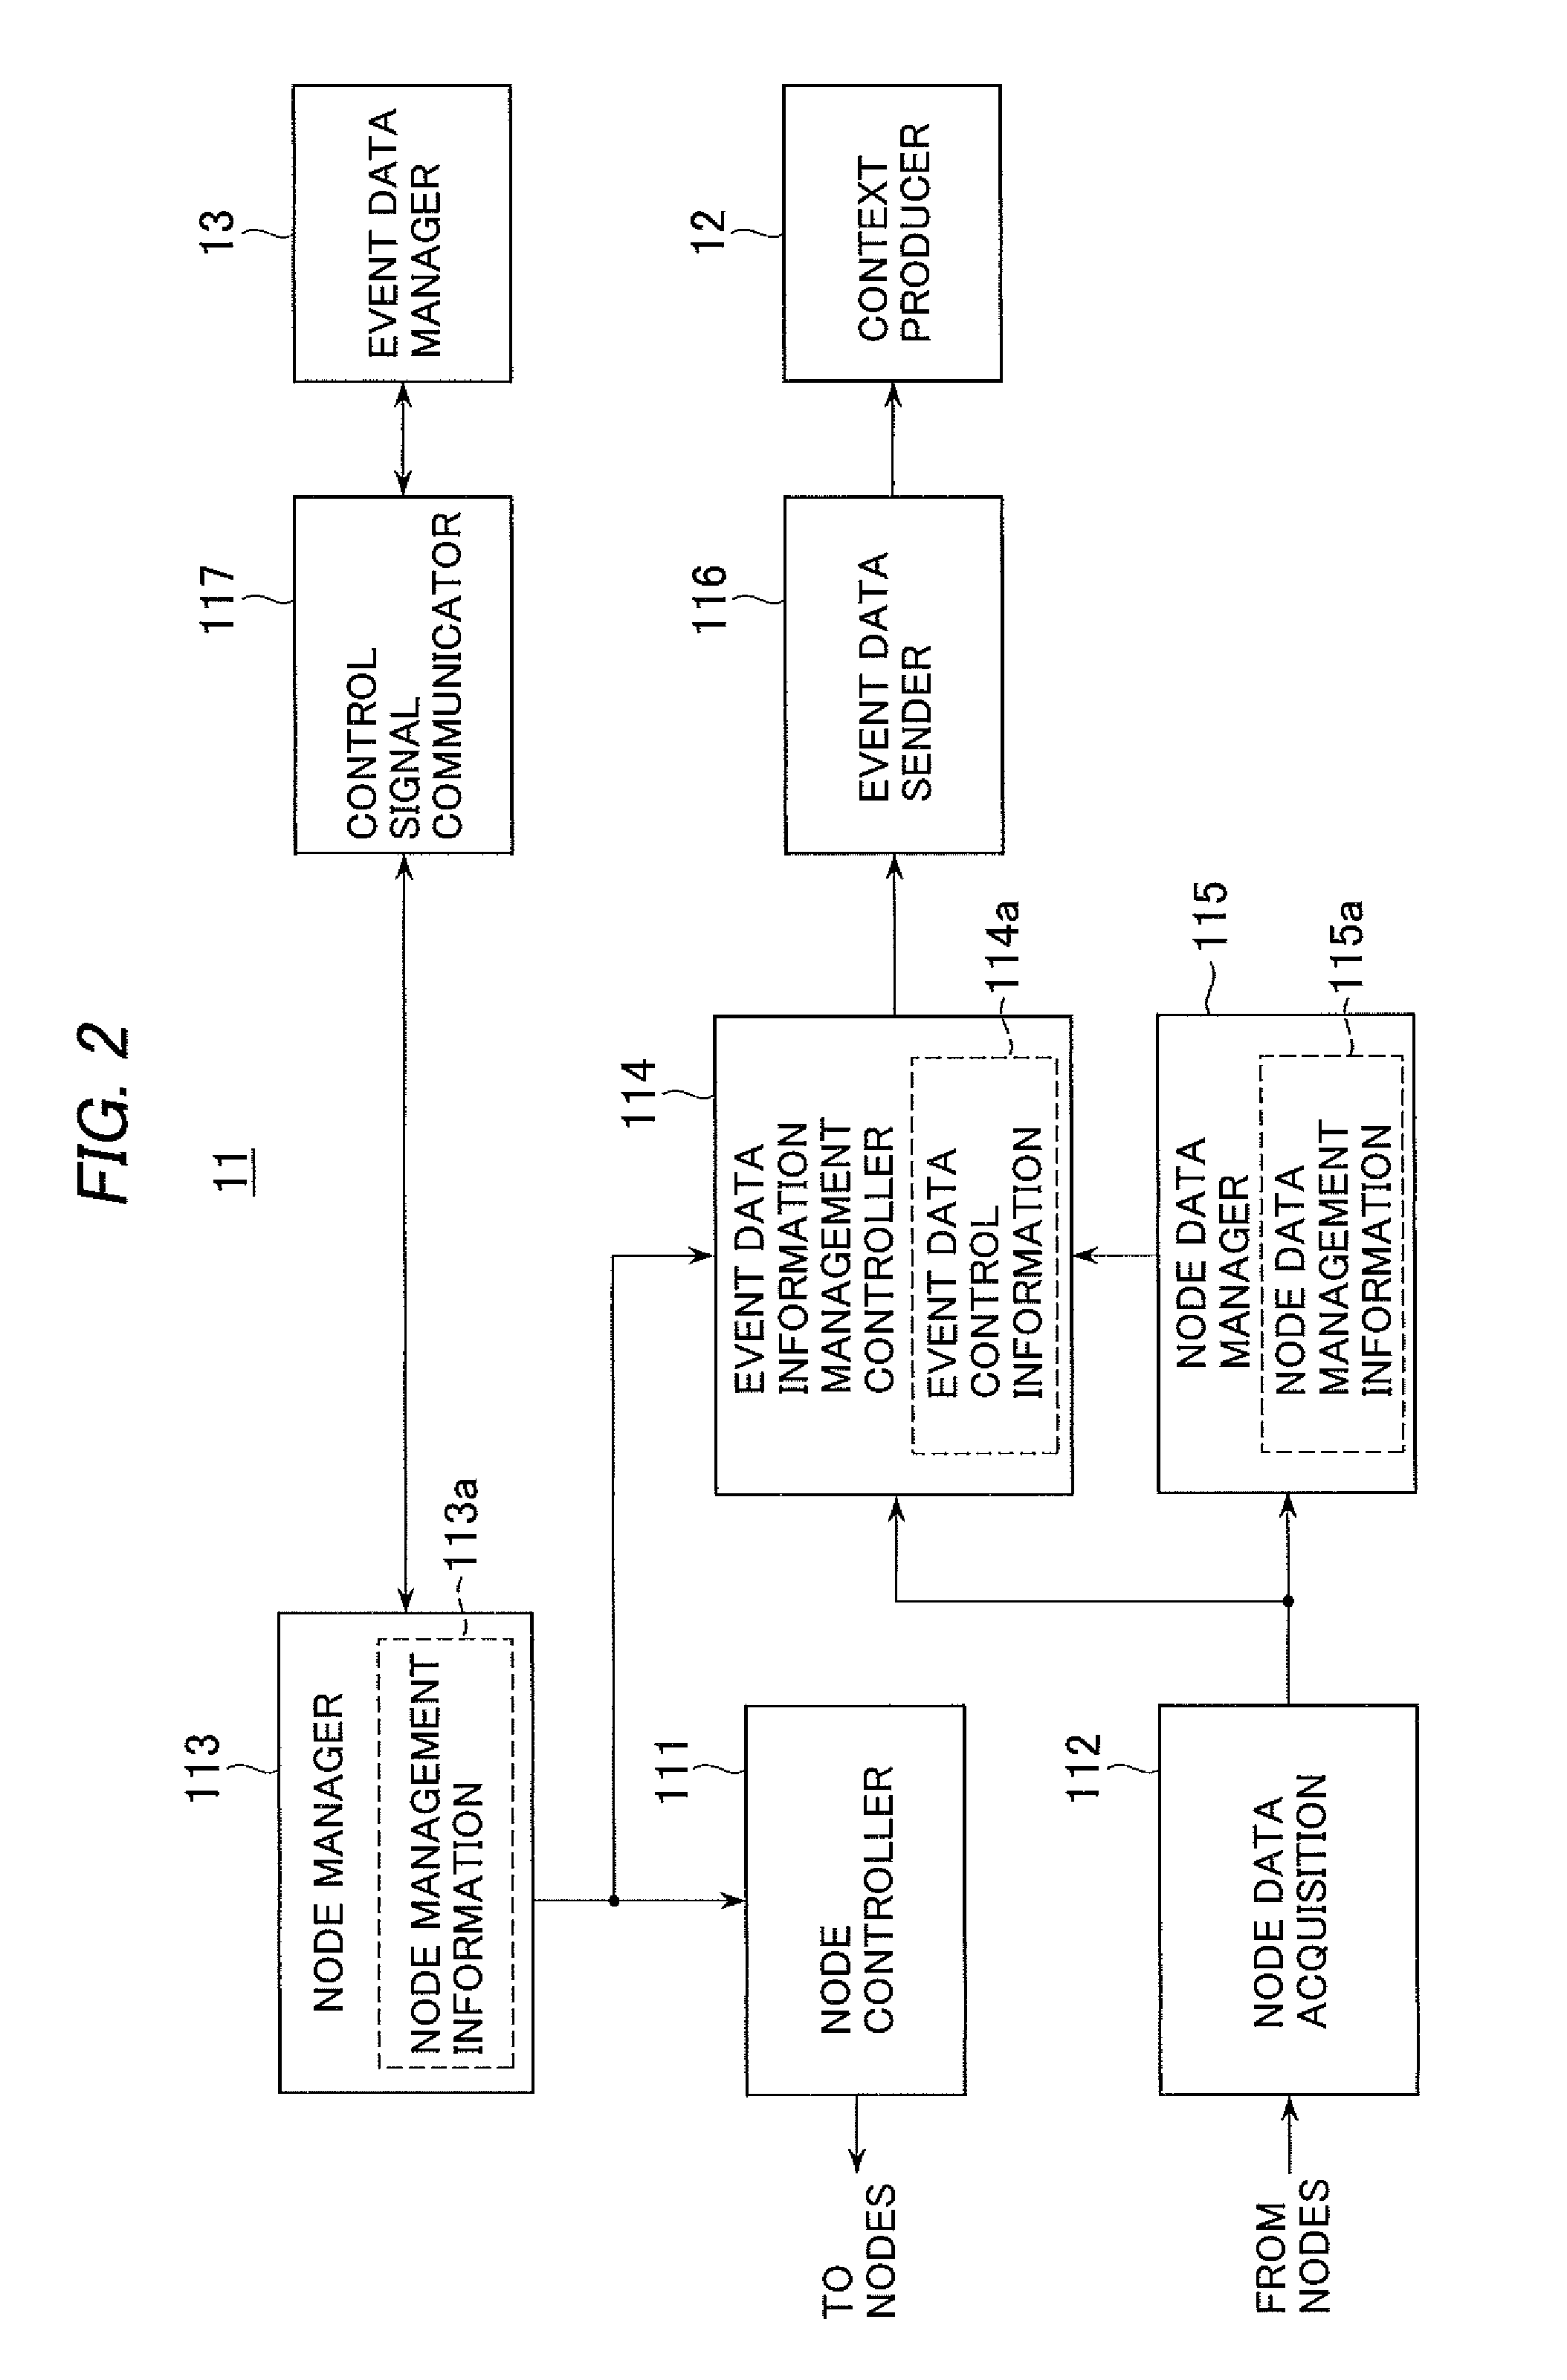 Context-awareness system and method of forming event data